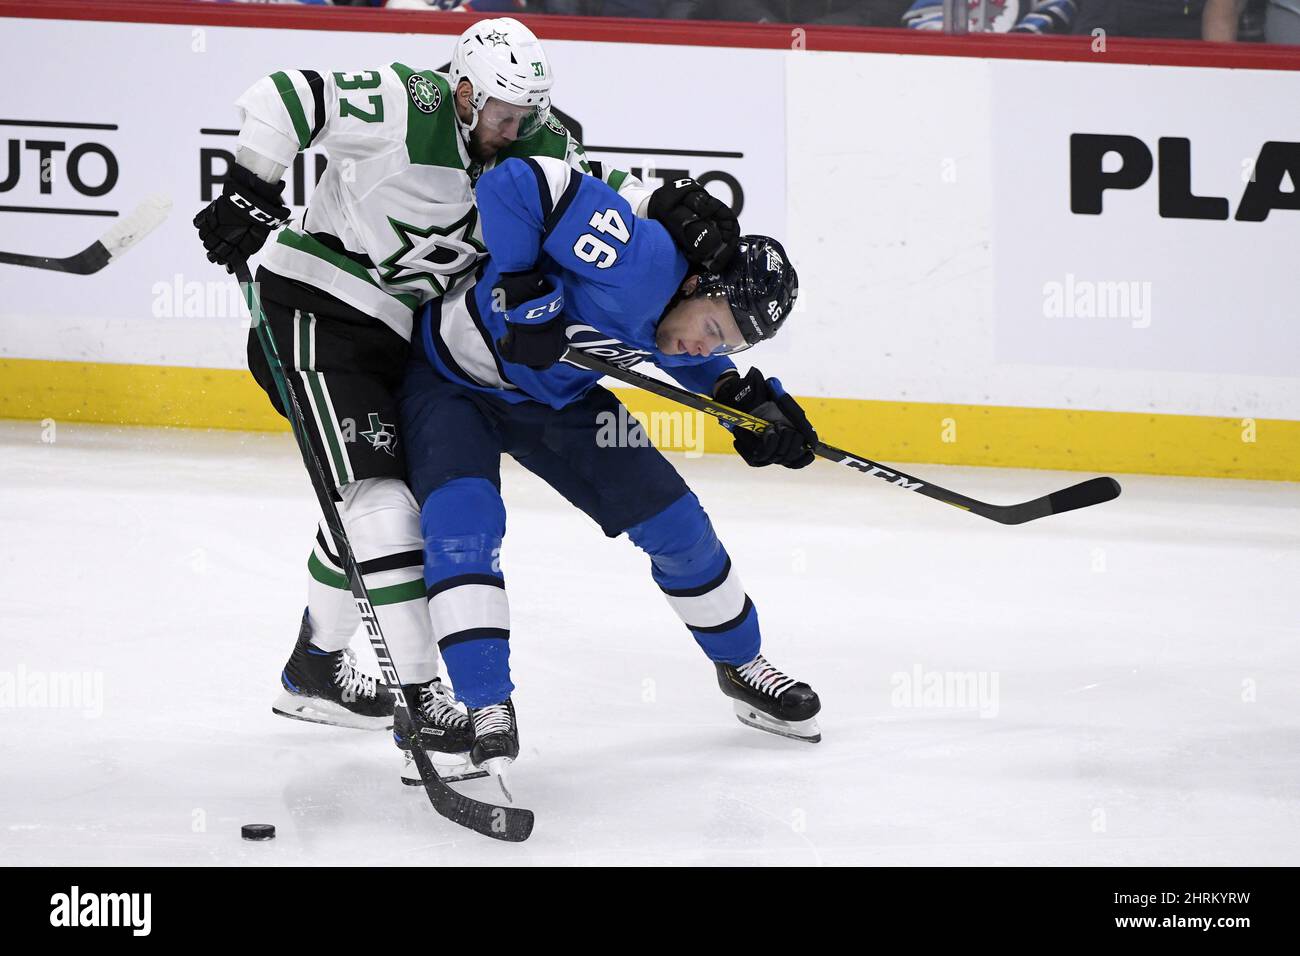 Winnipeg Jets' Joona Luoto (46) is checked by Dallas Stars' Justin Downling (37) during first period NHL action in Winnipeg on Sunday, Nov. 10, 2019. THE CANADIAN PRESS/Fred Greenslade Stock Photo